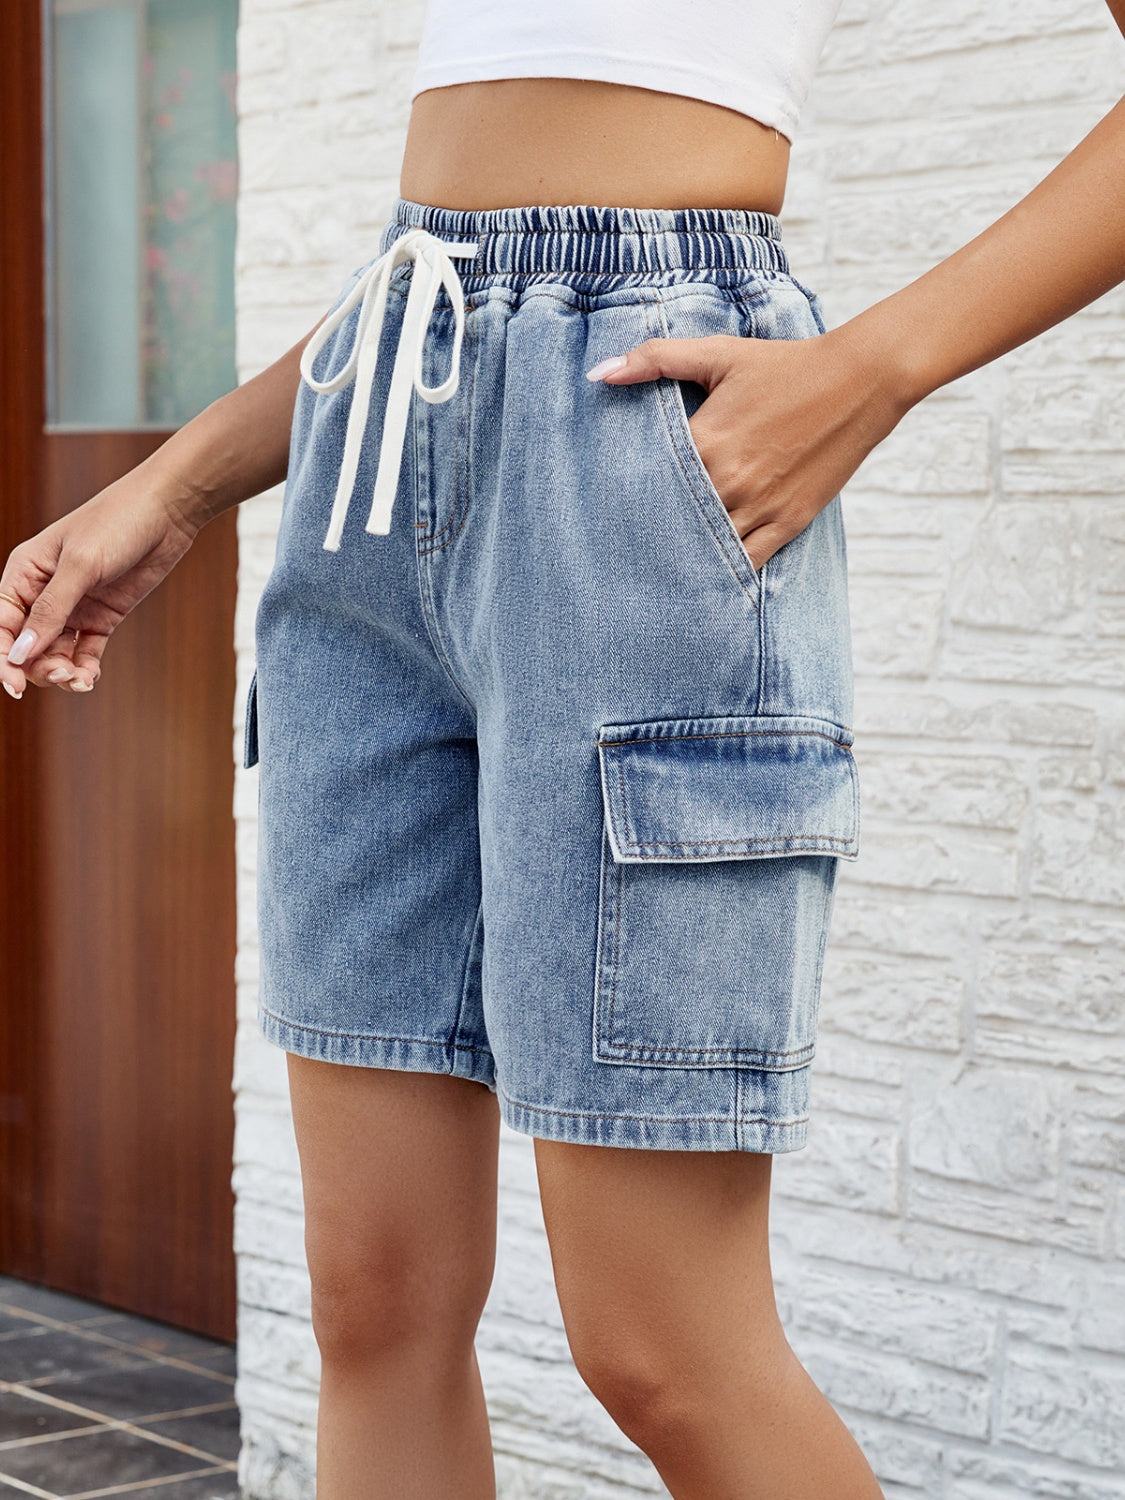 Women's Clothing, Drawstring Denim Shorts with Pockets, Front View Hand in pocket, Rochelle's House